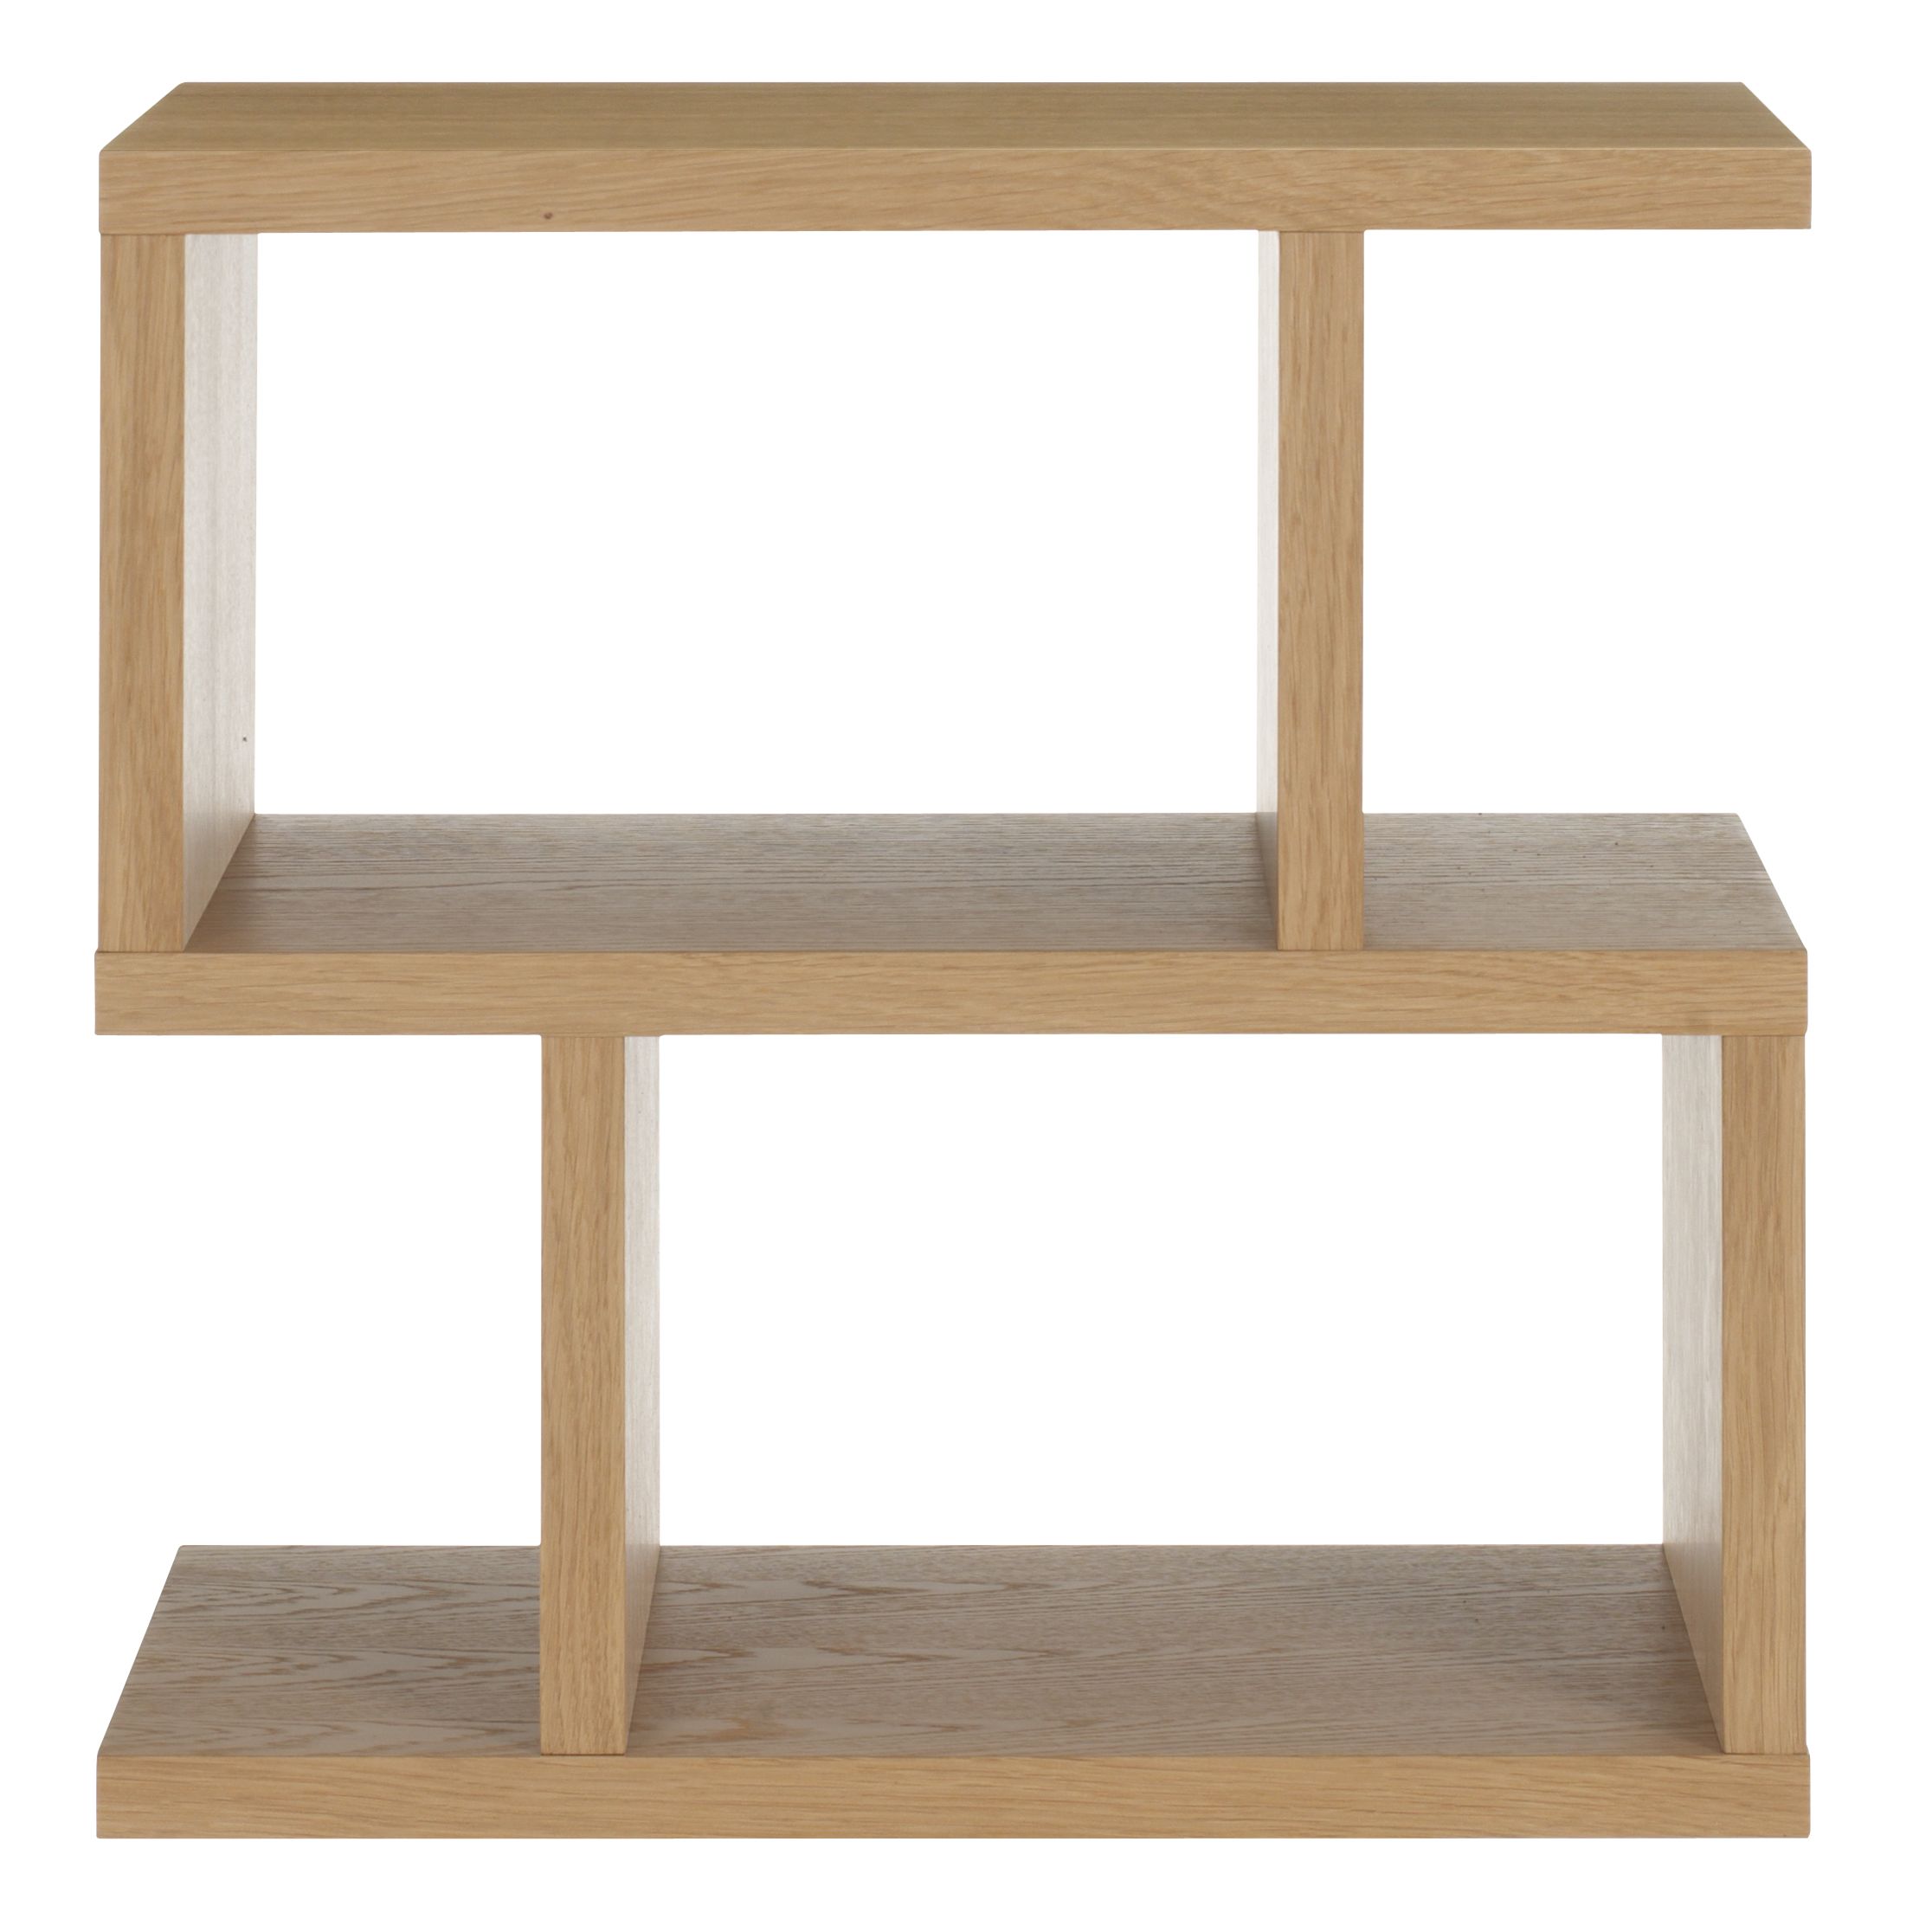 Content by Conran Balance Side Table, Oak at JohnLewis